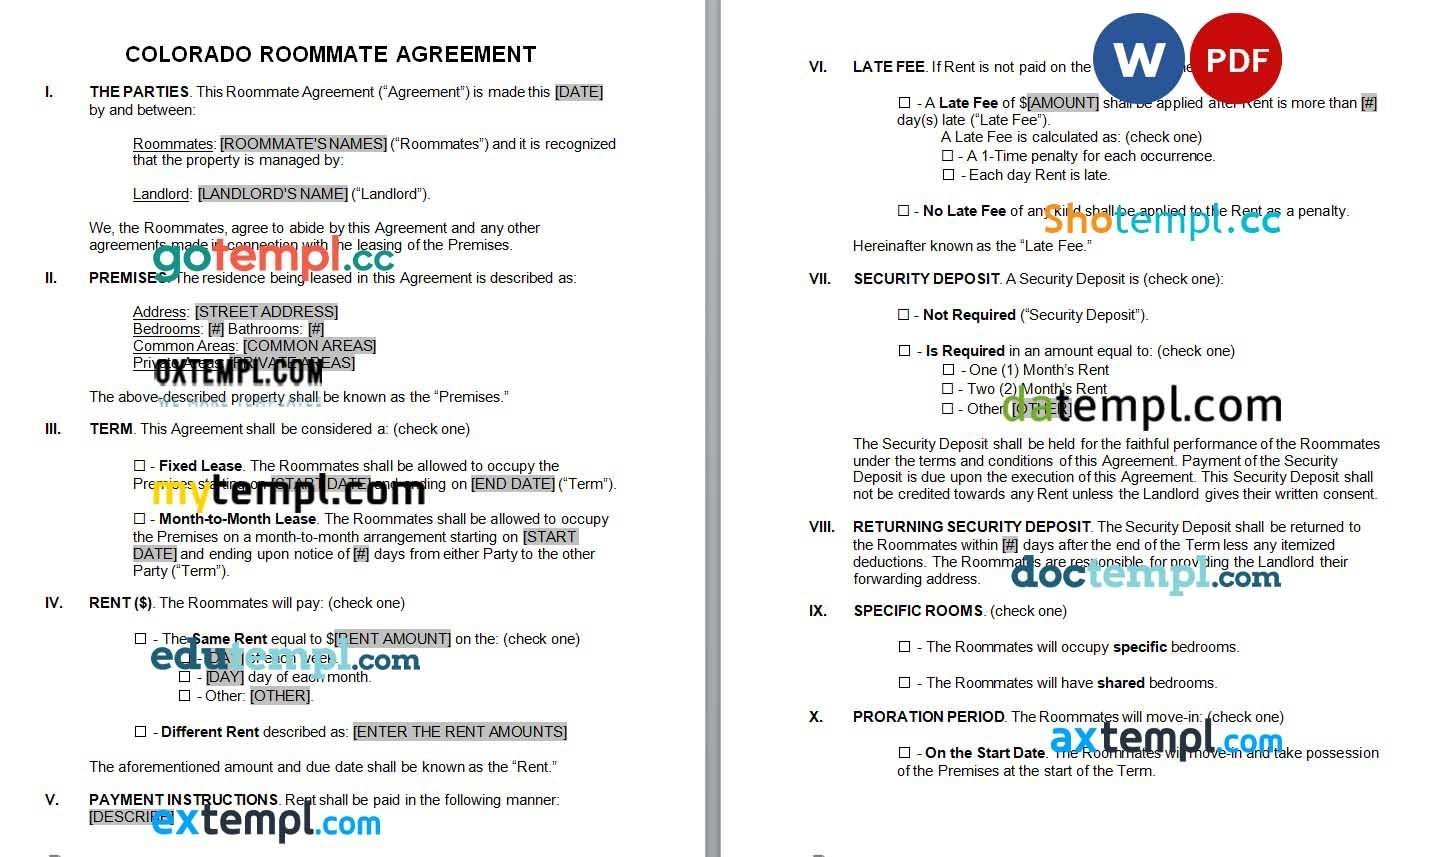 Colorado Roommate Lease Agreement Word example, fully editable